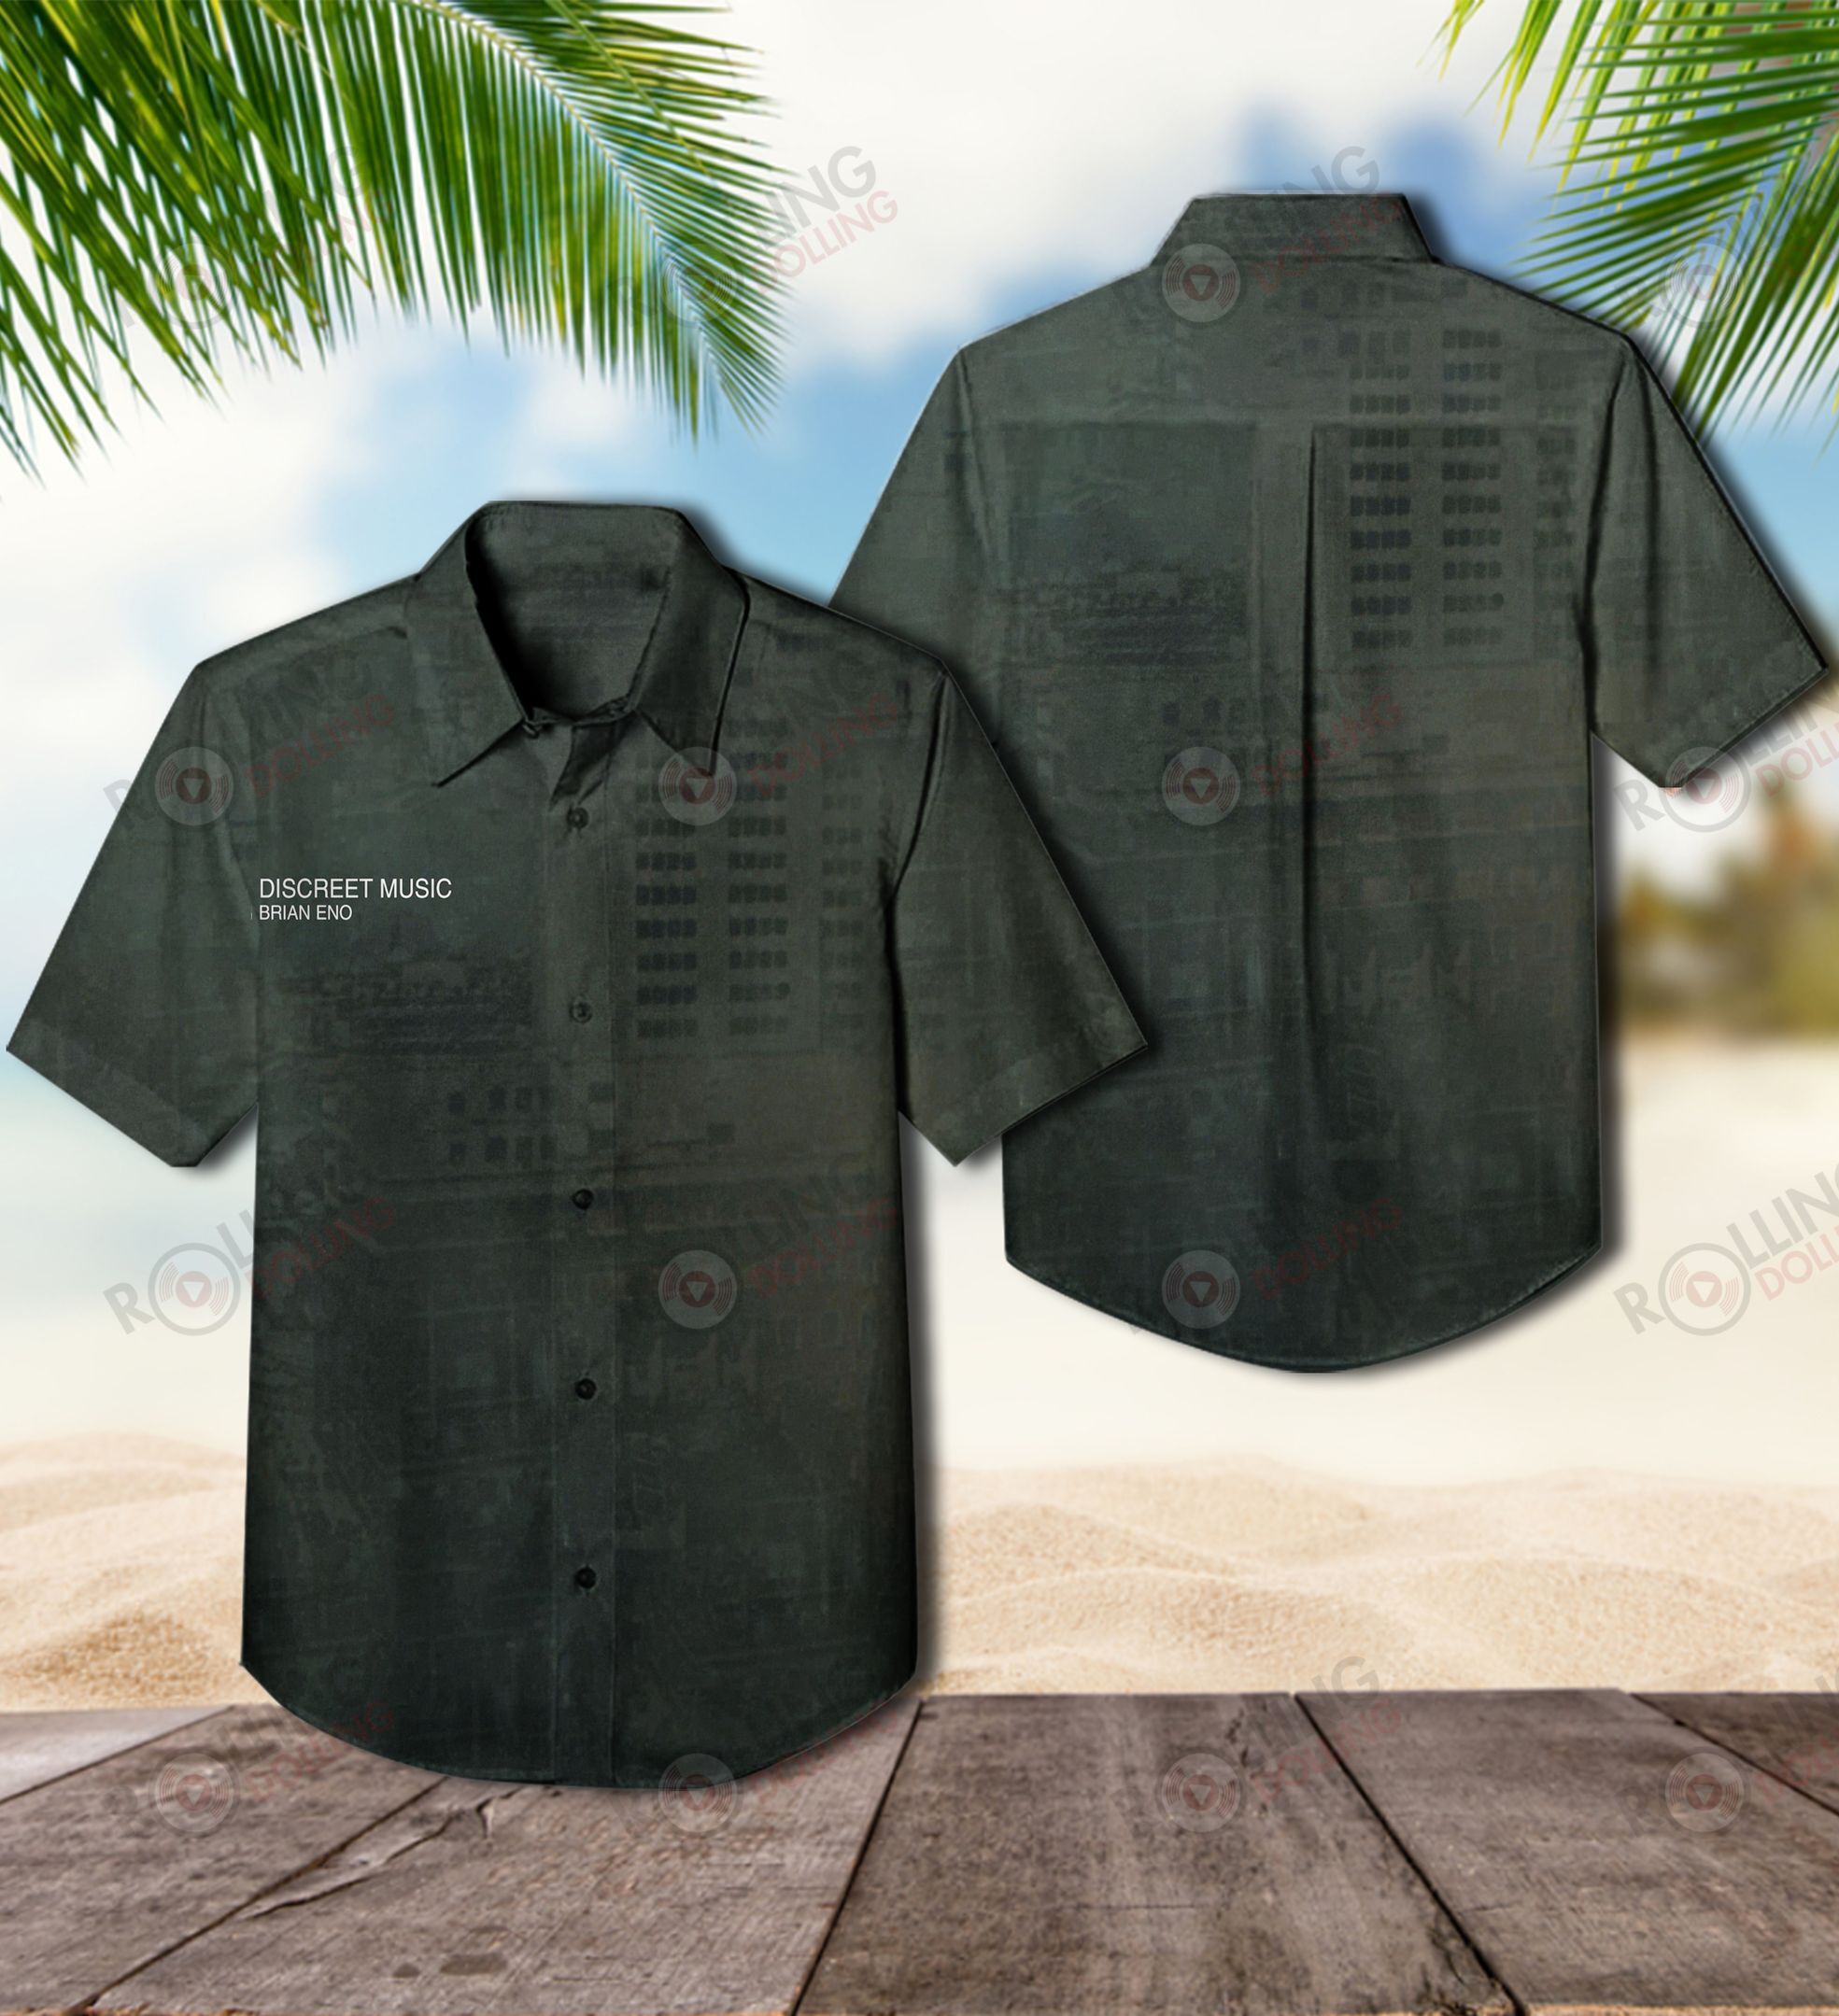 The Hawaiian Shirt is a popular shirt that is worn by Rock band fans 47